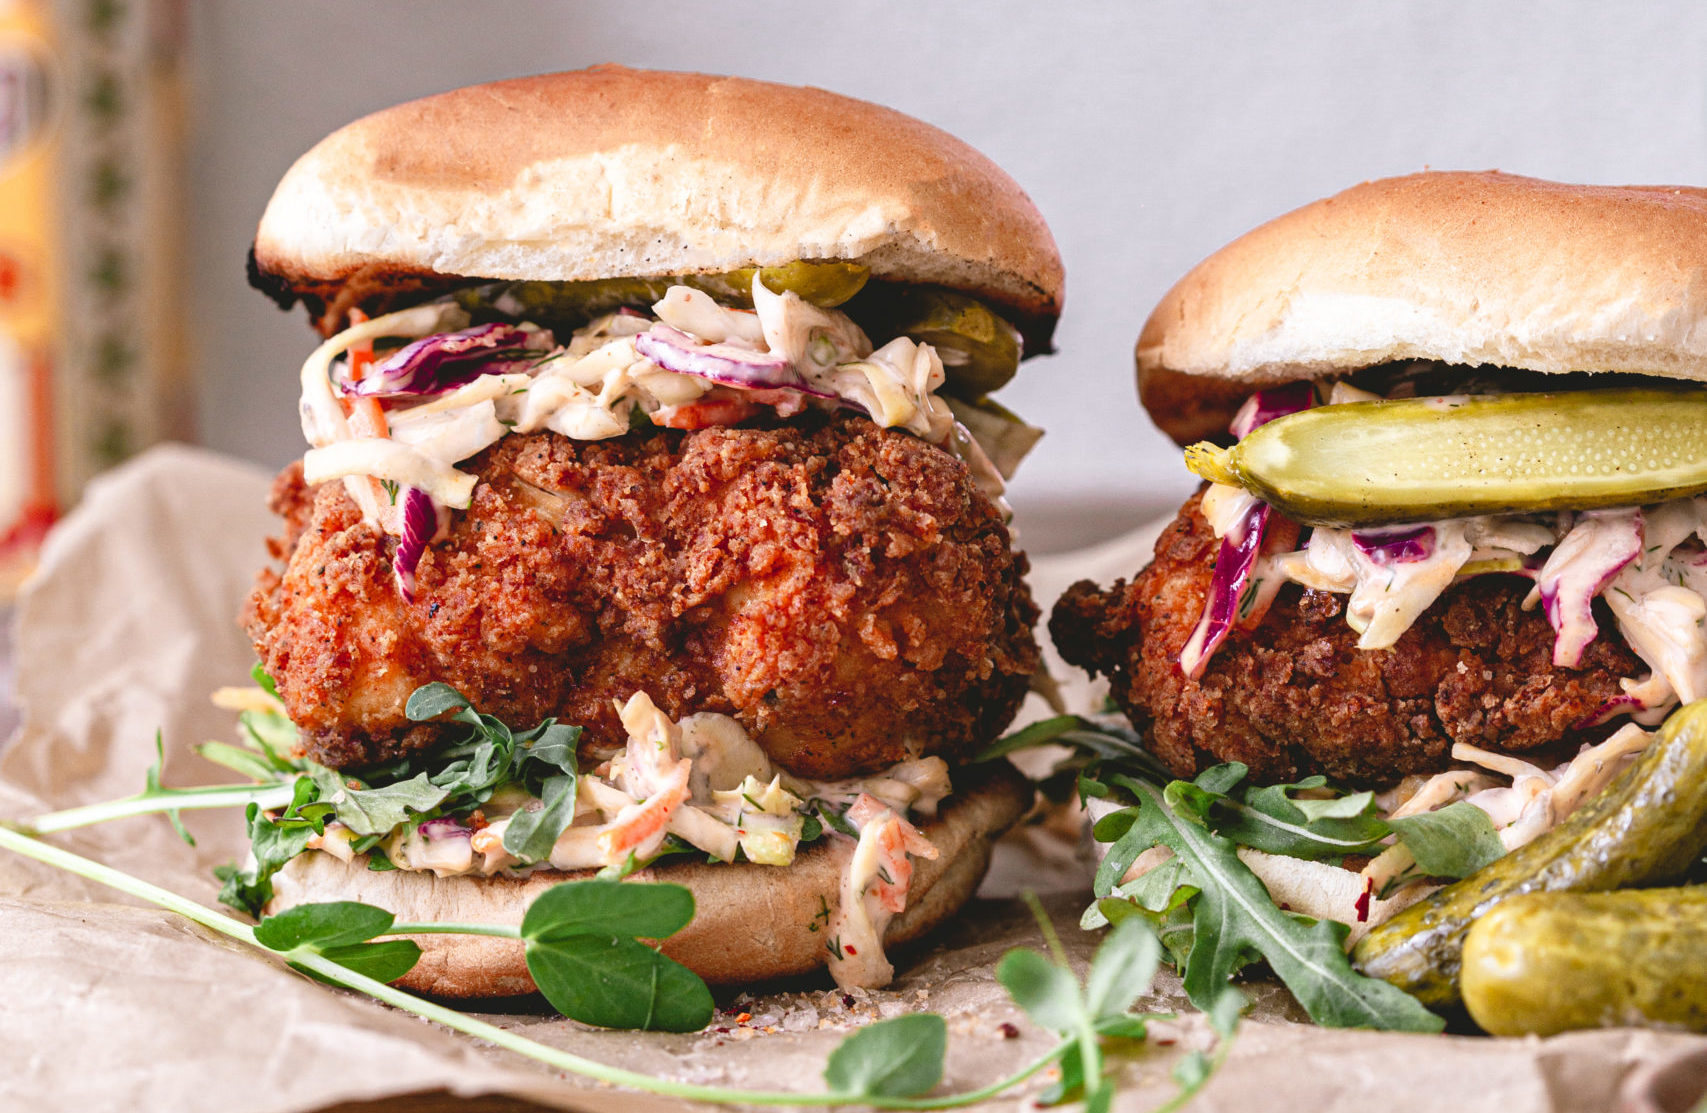 SpicySouthern Style Fried Chicken Sandwich With Coleslaw And Pickles